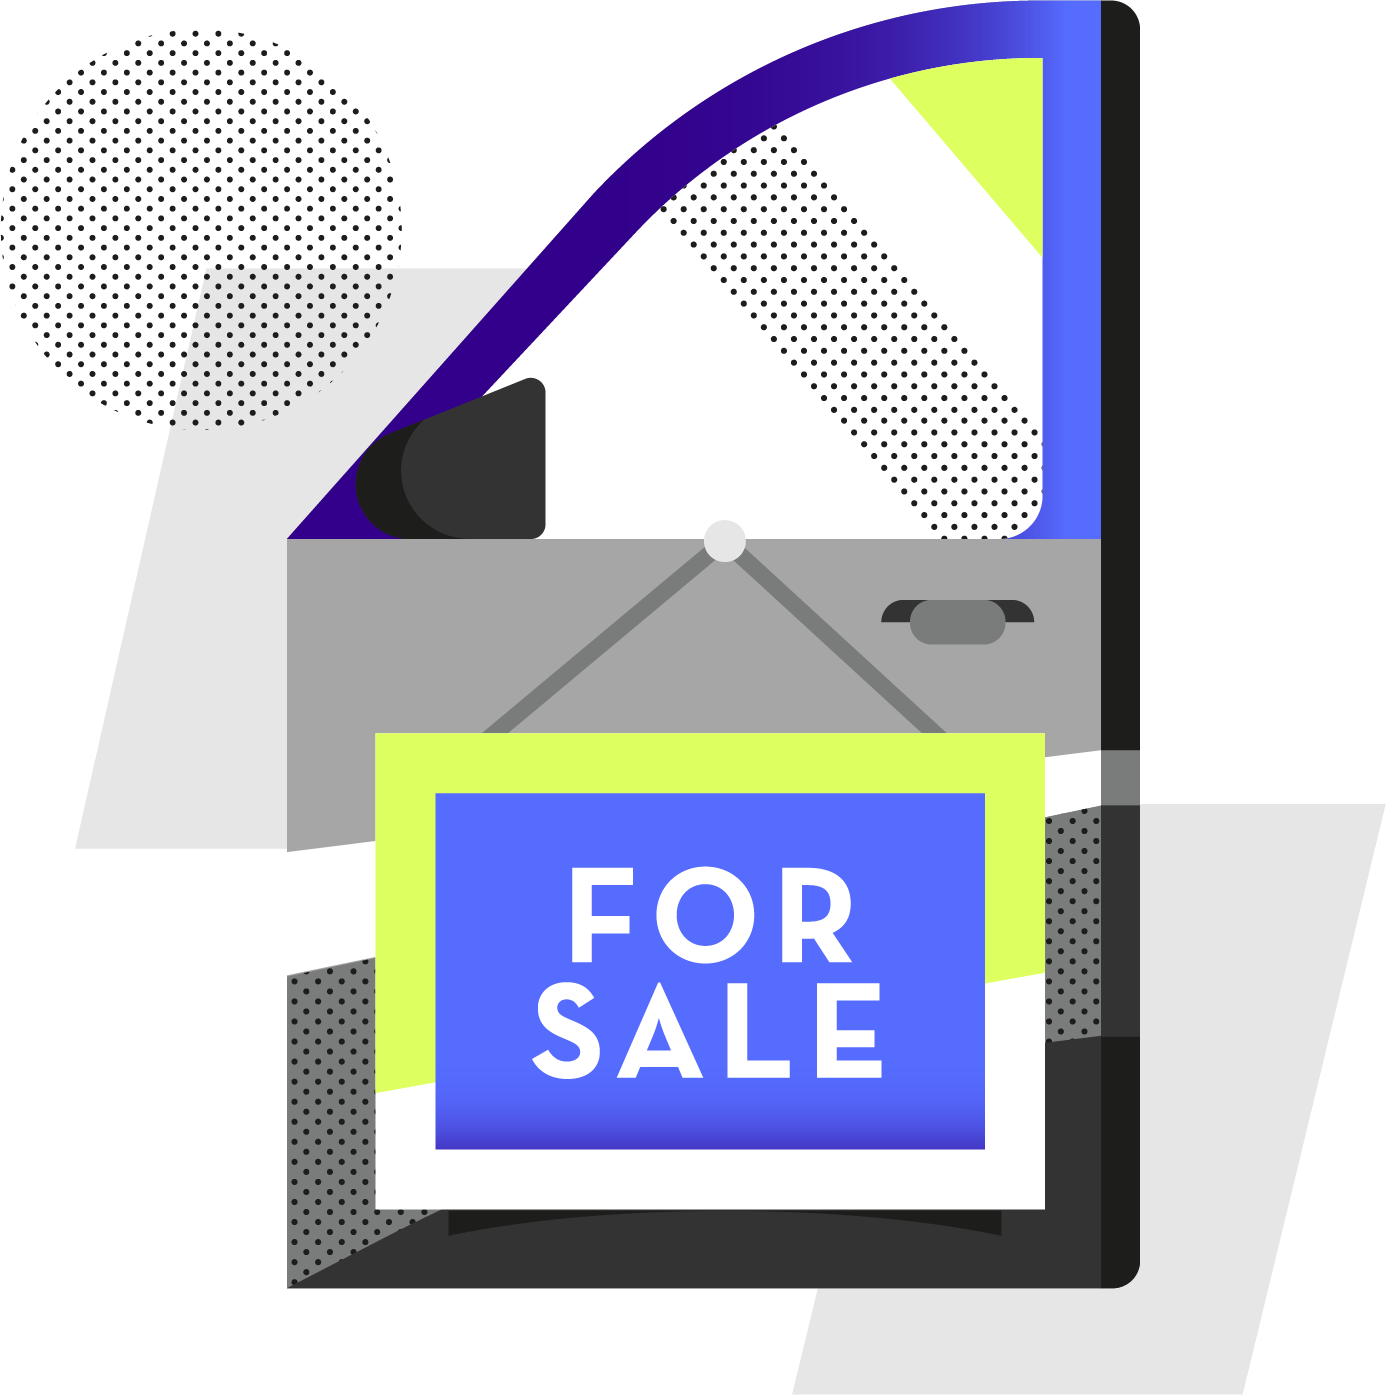 Illustration of a car door with a For Sale sign